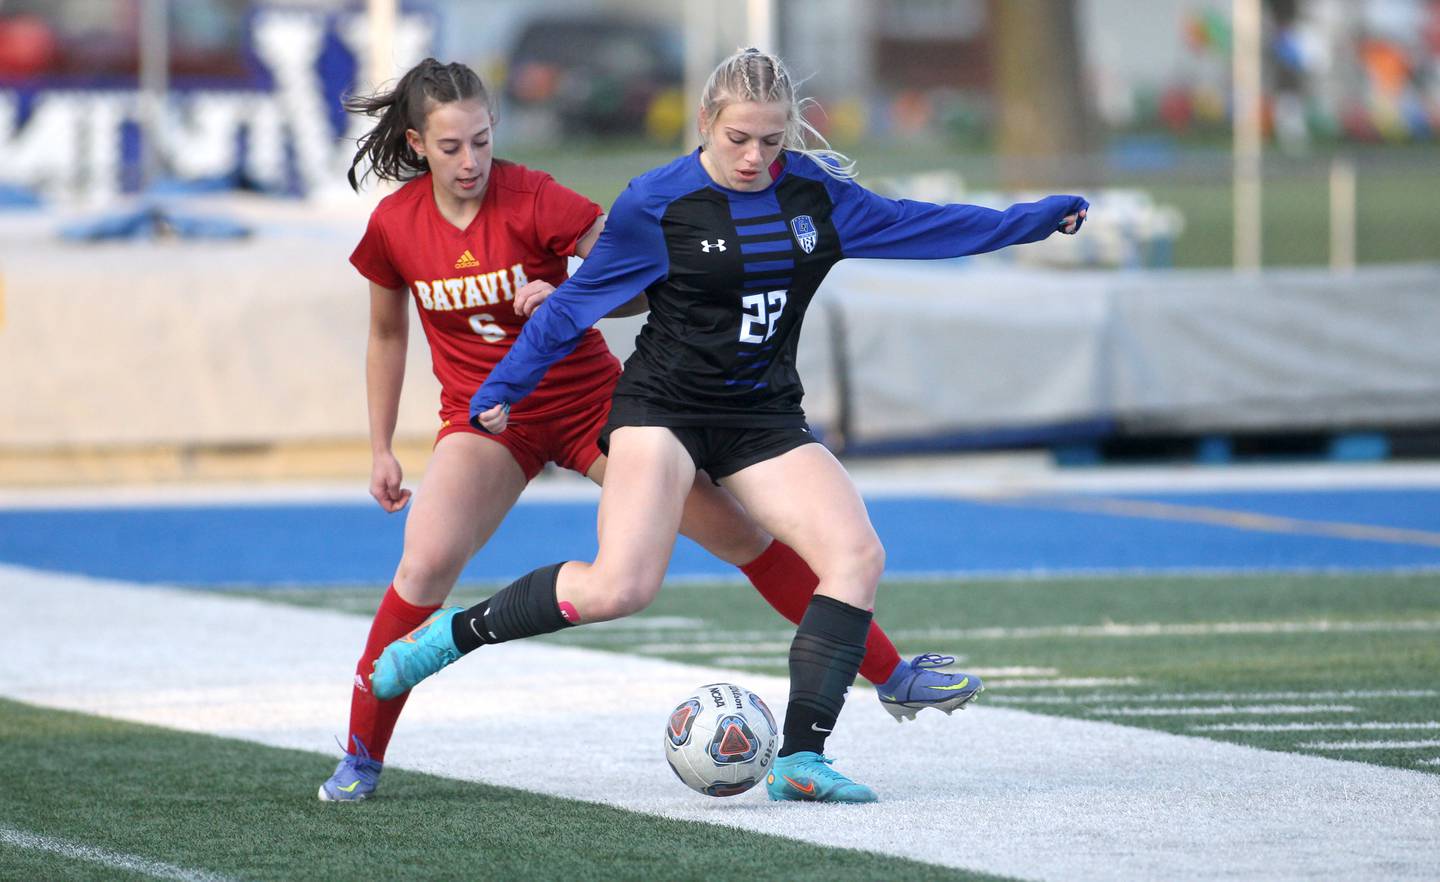 Geneva’s Morgan Rudowicz (22) and Batavia’s Carlin King go after the ball during a Tri-Cities Night game at Geneva High School on Tuesday, April 26, 2022.